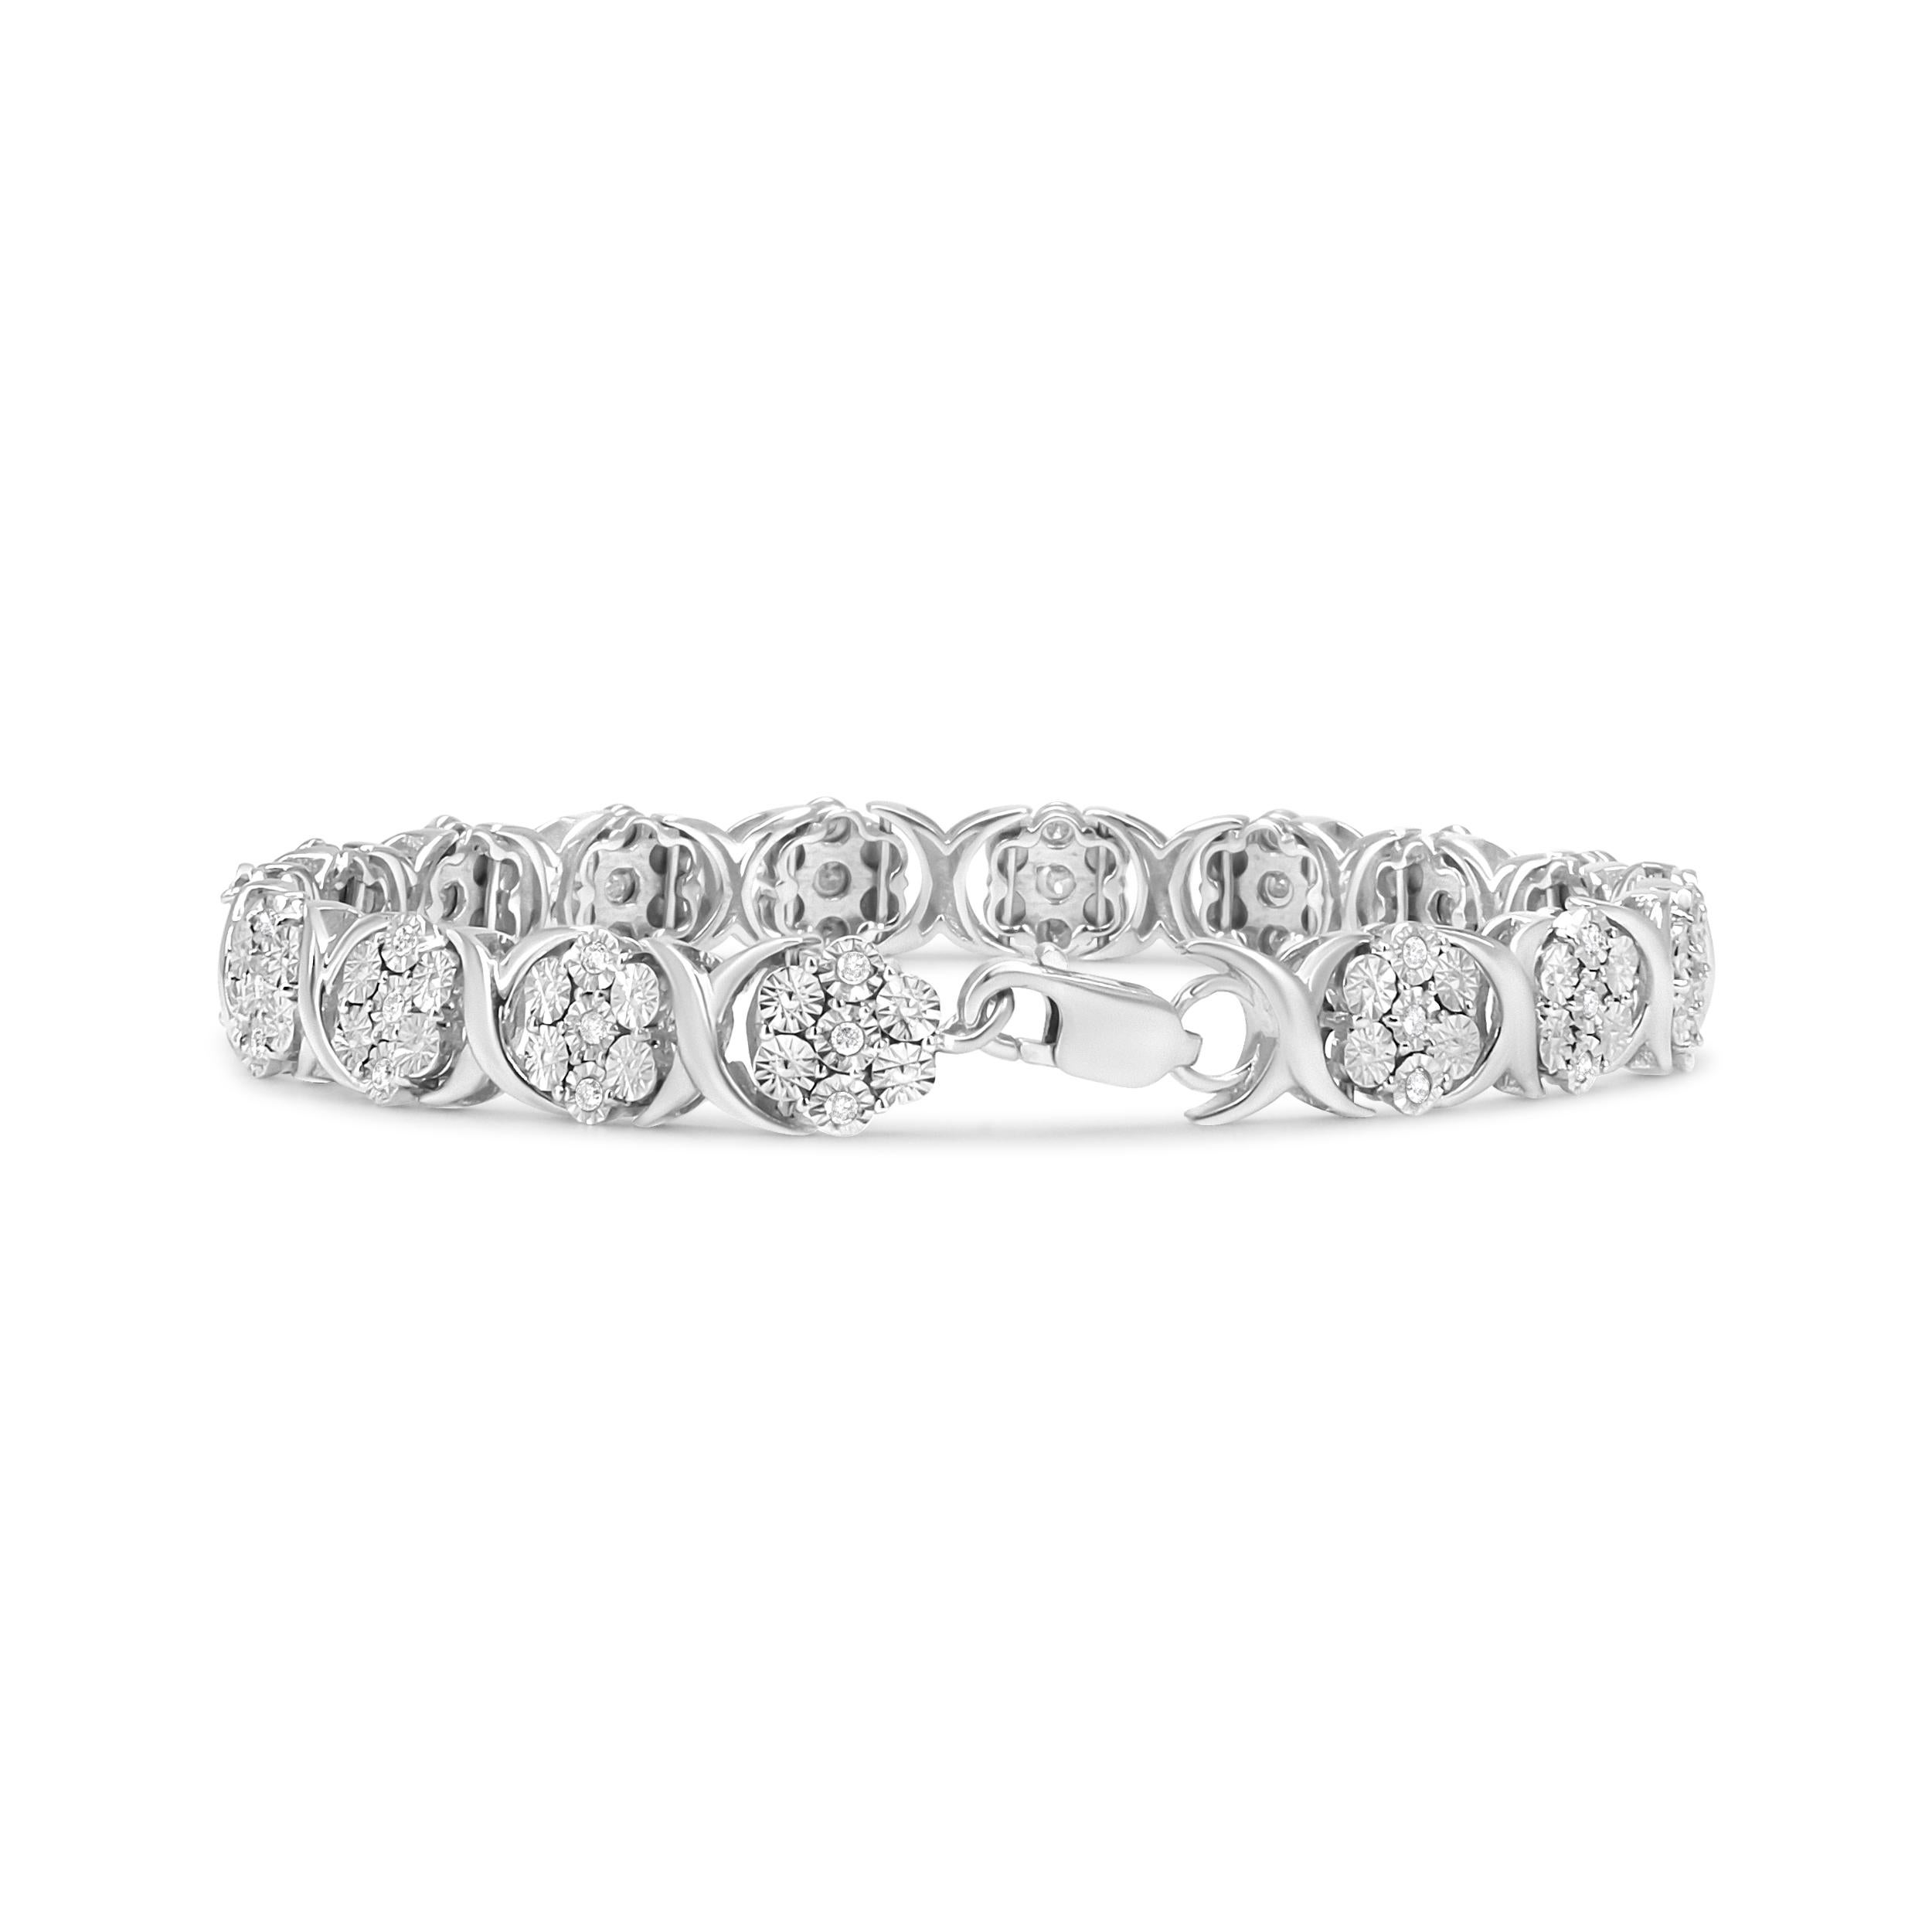 A different take on the typical diamond bracelet, this eye-catching design is highlighted by the 51 natural round diamonds in miracle setting that form beautiful floral clusters. Housed in a .925 Sterling Silver chain, the striking piece radiates